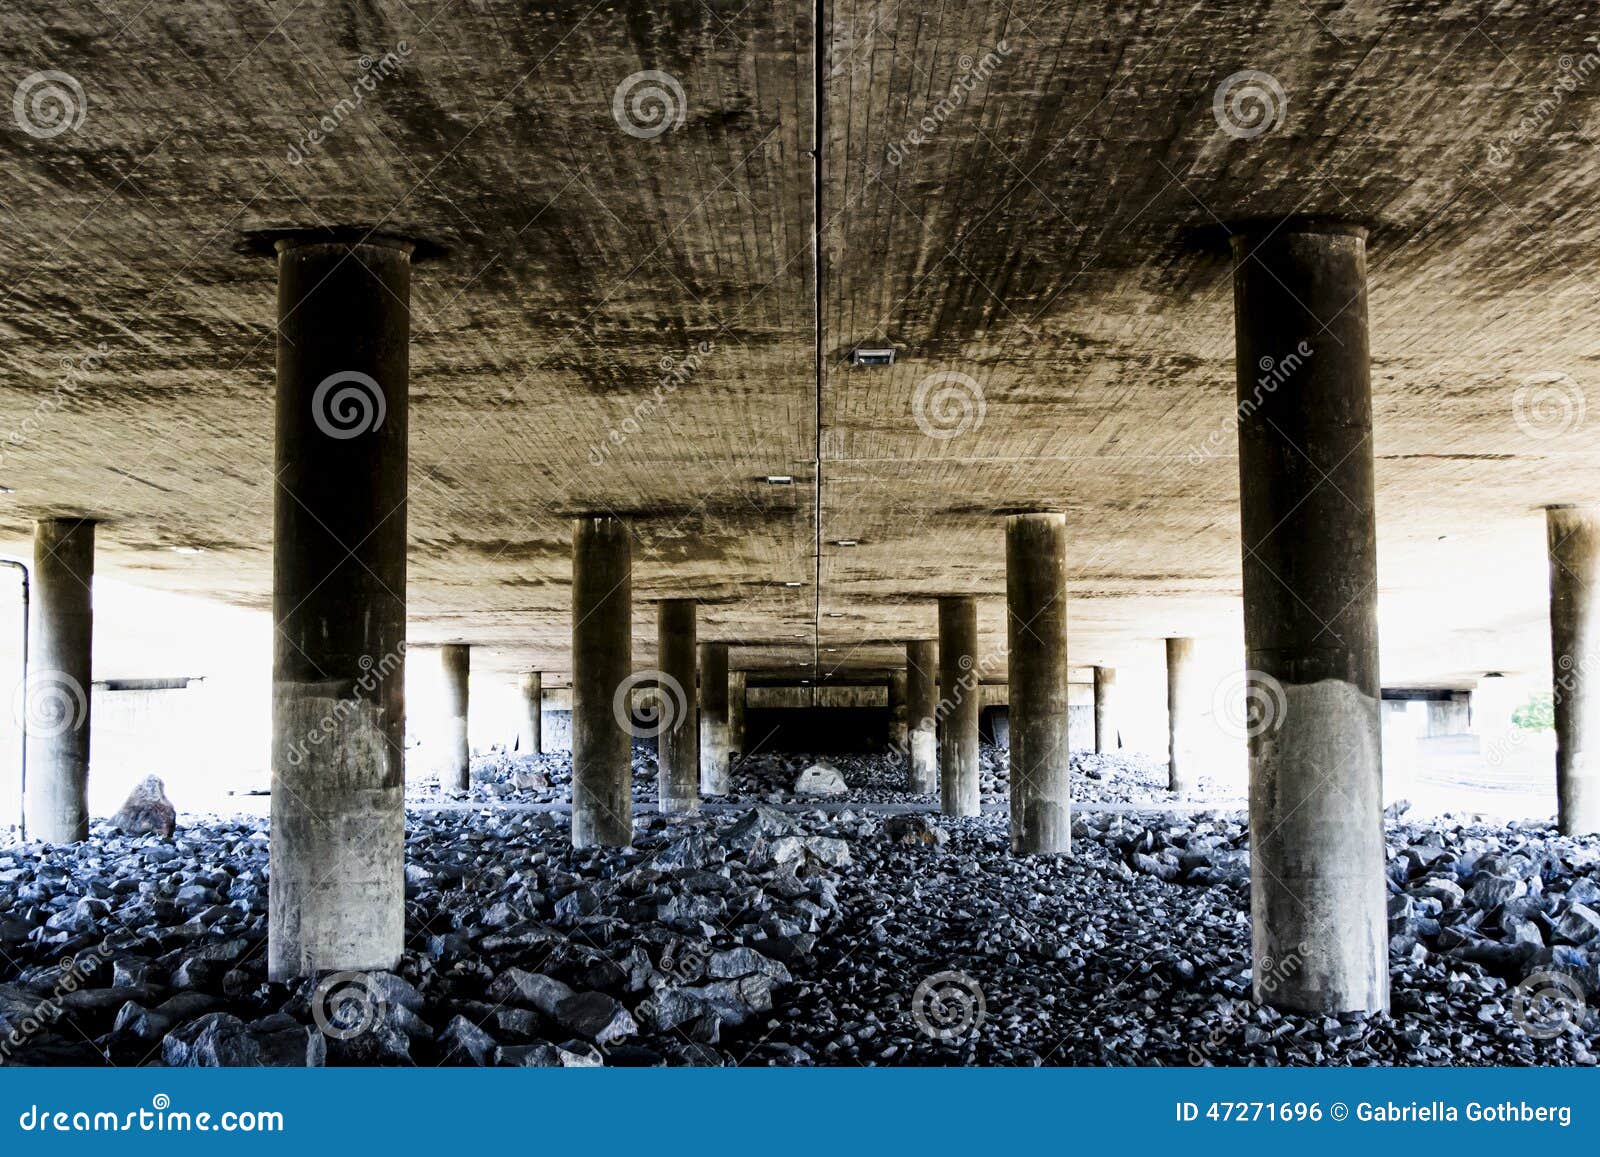 deep and rough perspective from under a concrete bridge